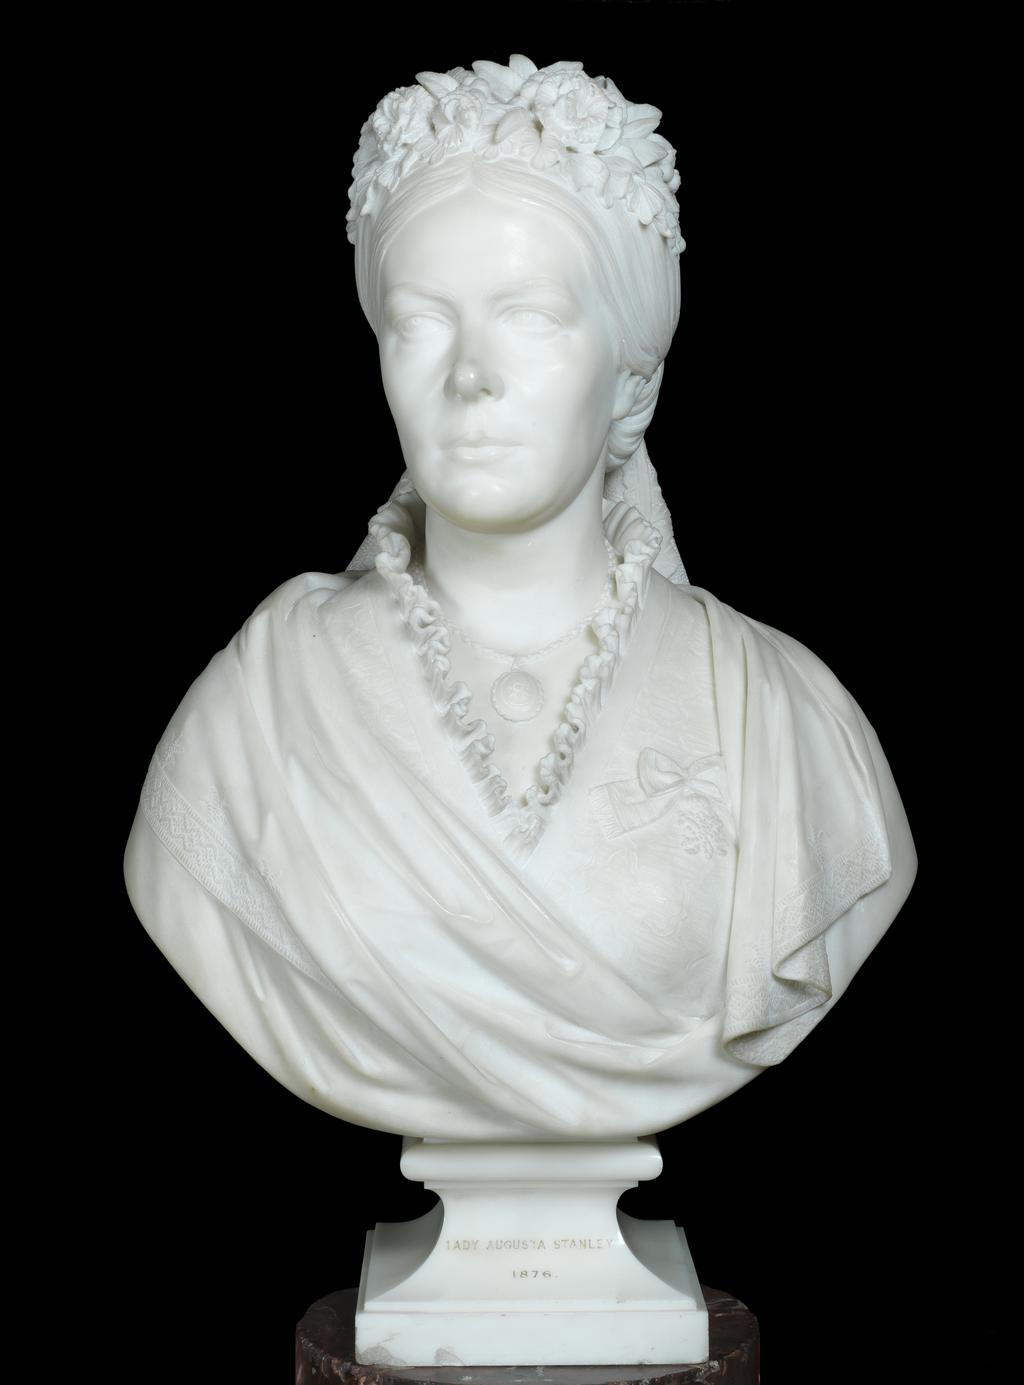 An image of Sculpture/Bust. Lady Augusta Stanley (1822-1876). Theed, William II (British, 1804-1891). White marble, carved, height, whole, 76.2 cm, dated 1877.